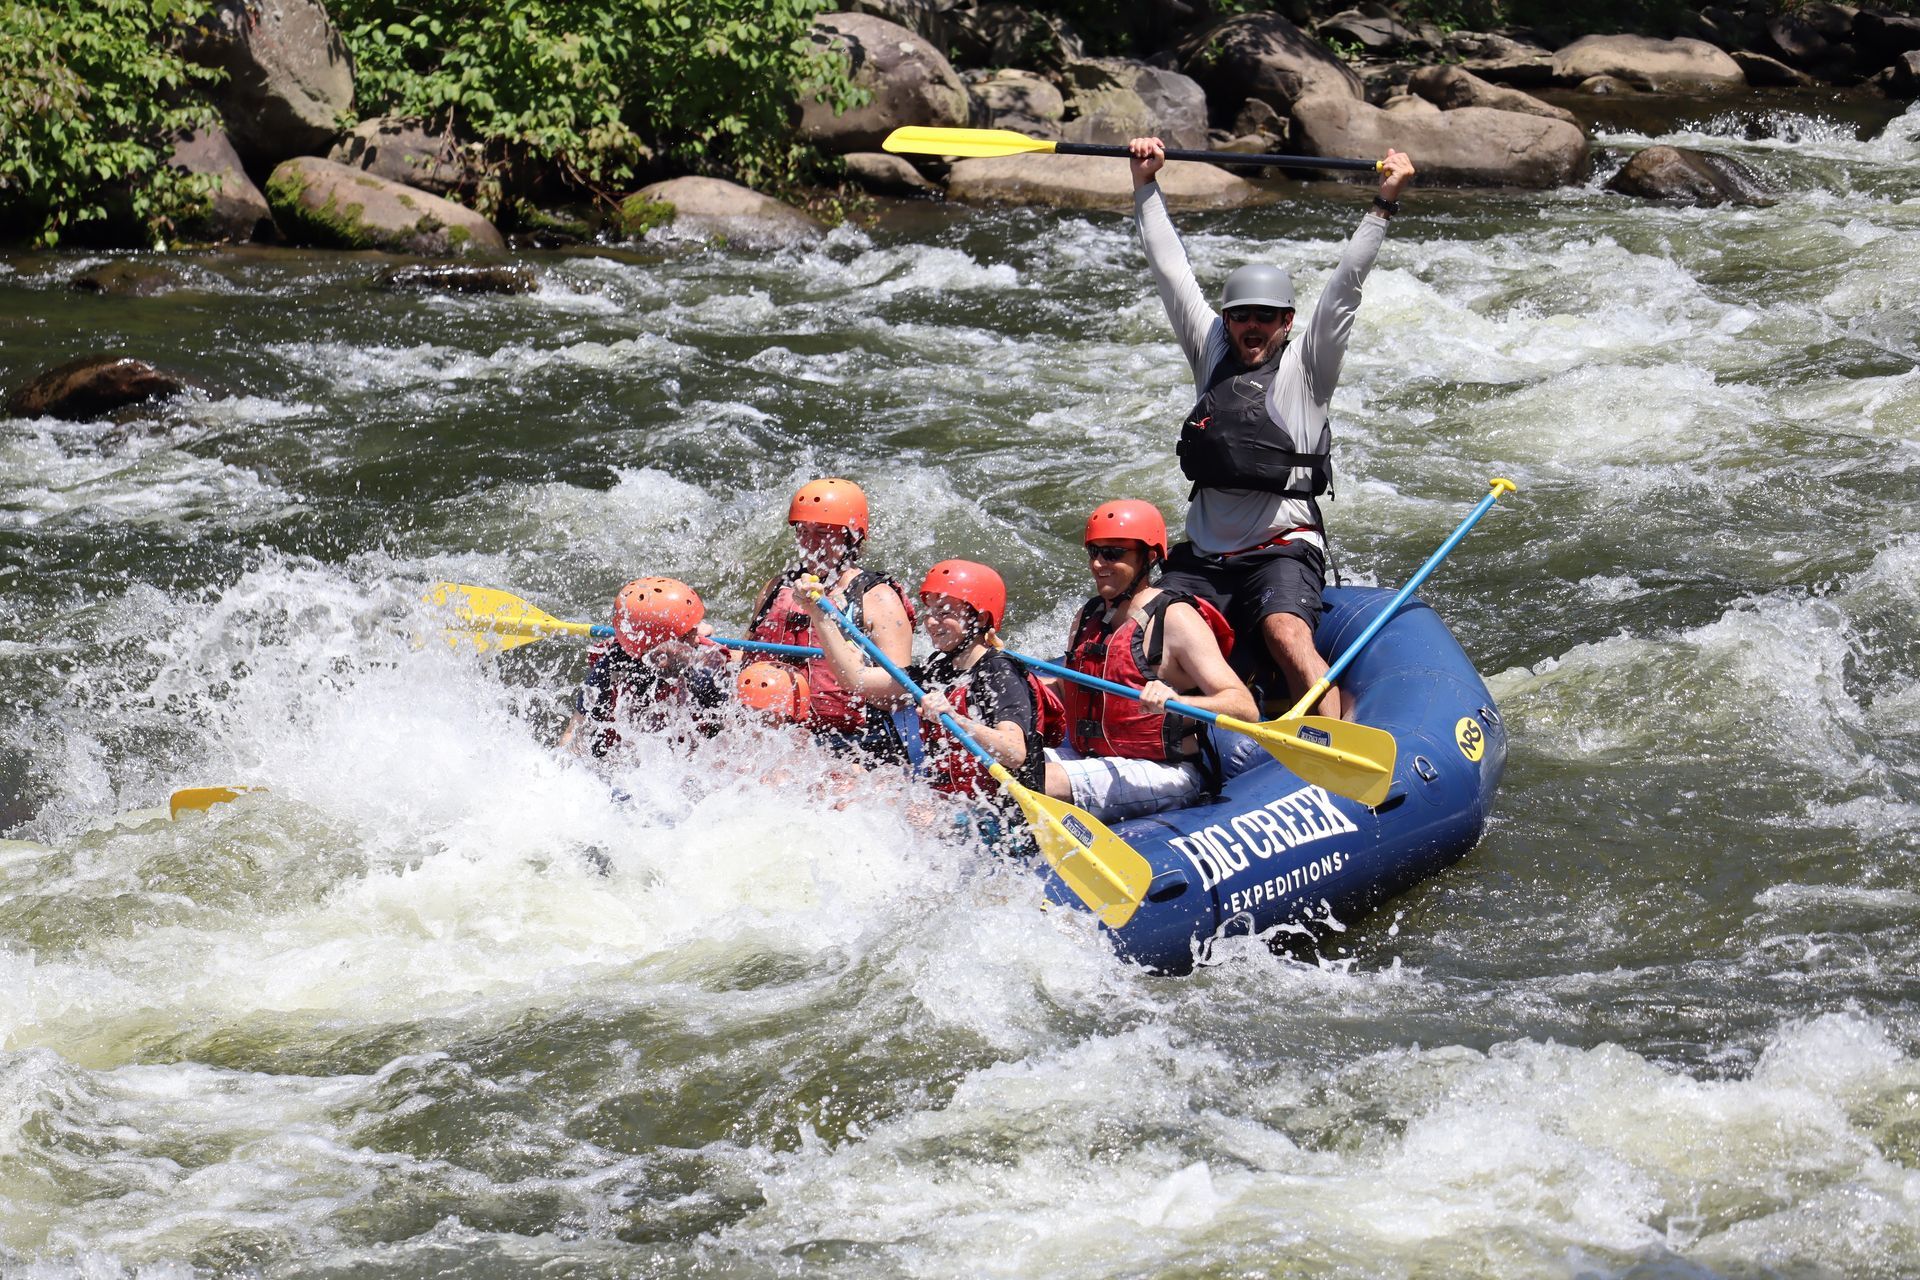 Premiere Adventure for Whitewater Rafting Gatlinburg, Pigeon Forge, Tennessee